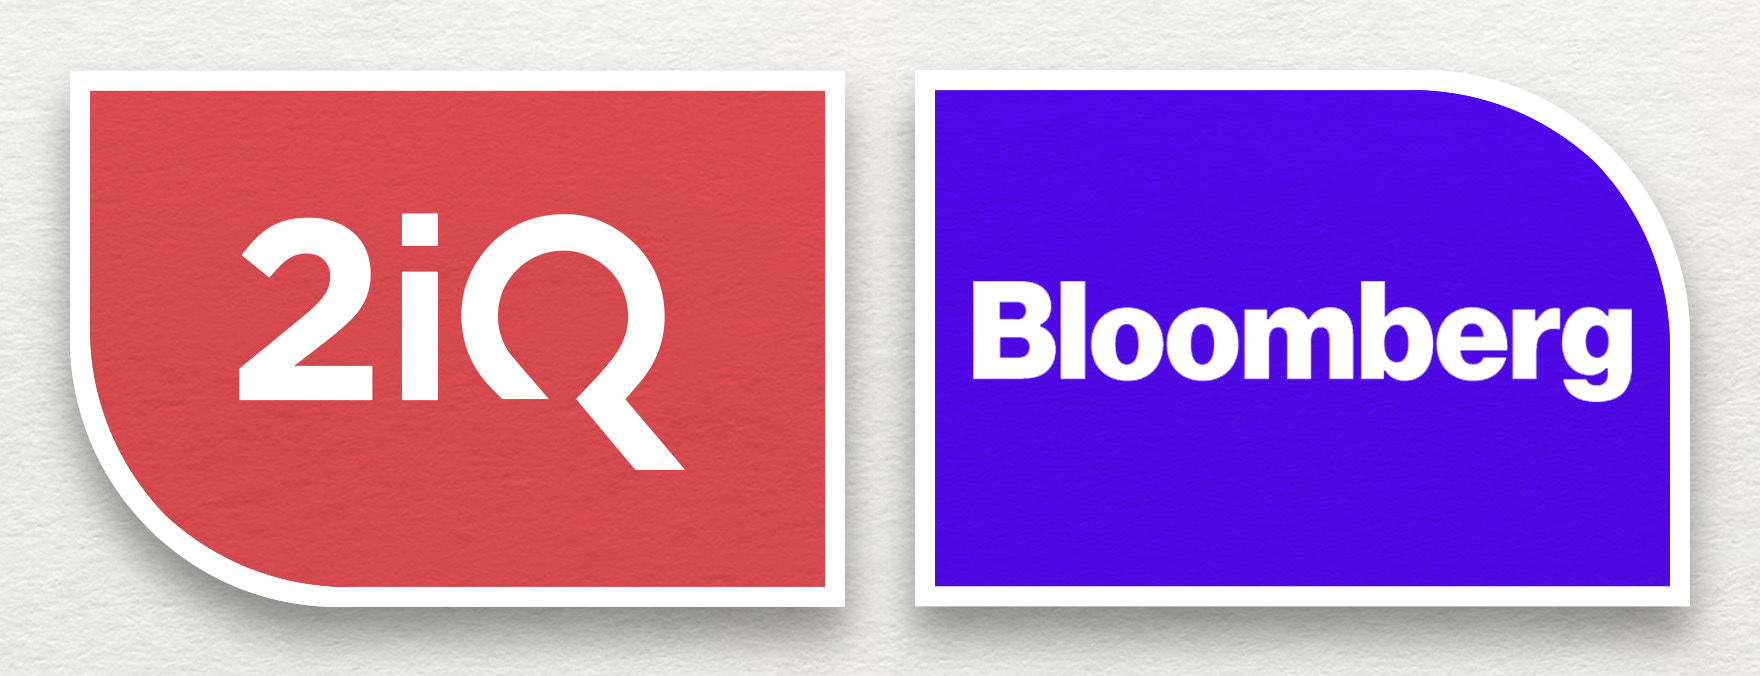 The Bloomberg logo in white and purple is on the right, while the 2iQ Research logo in red and white is on the left, both placed on grey background.